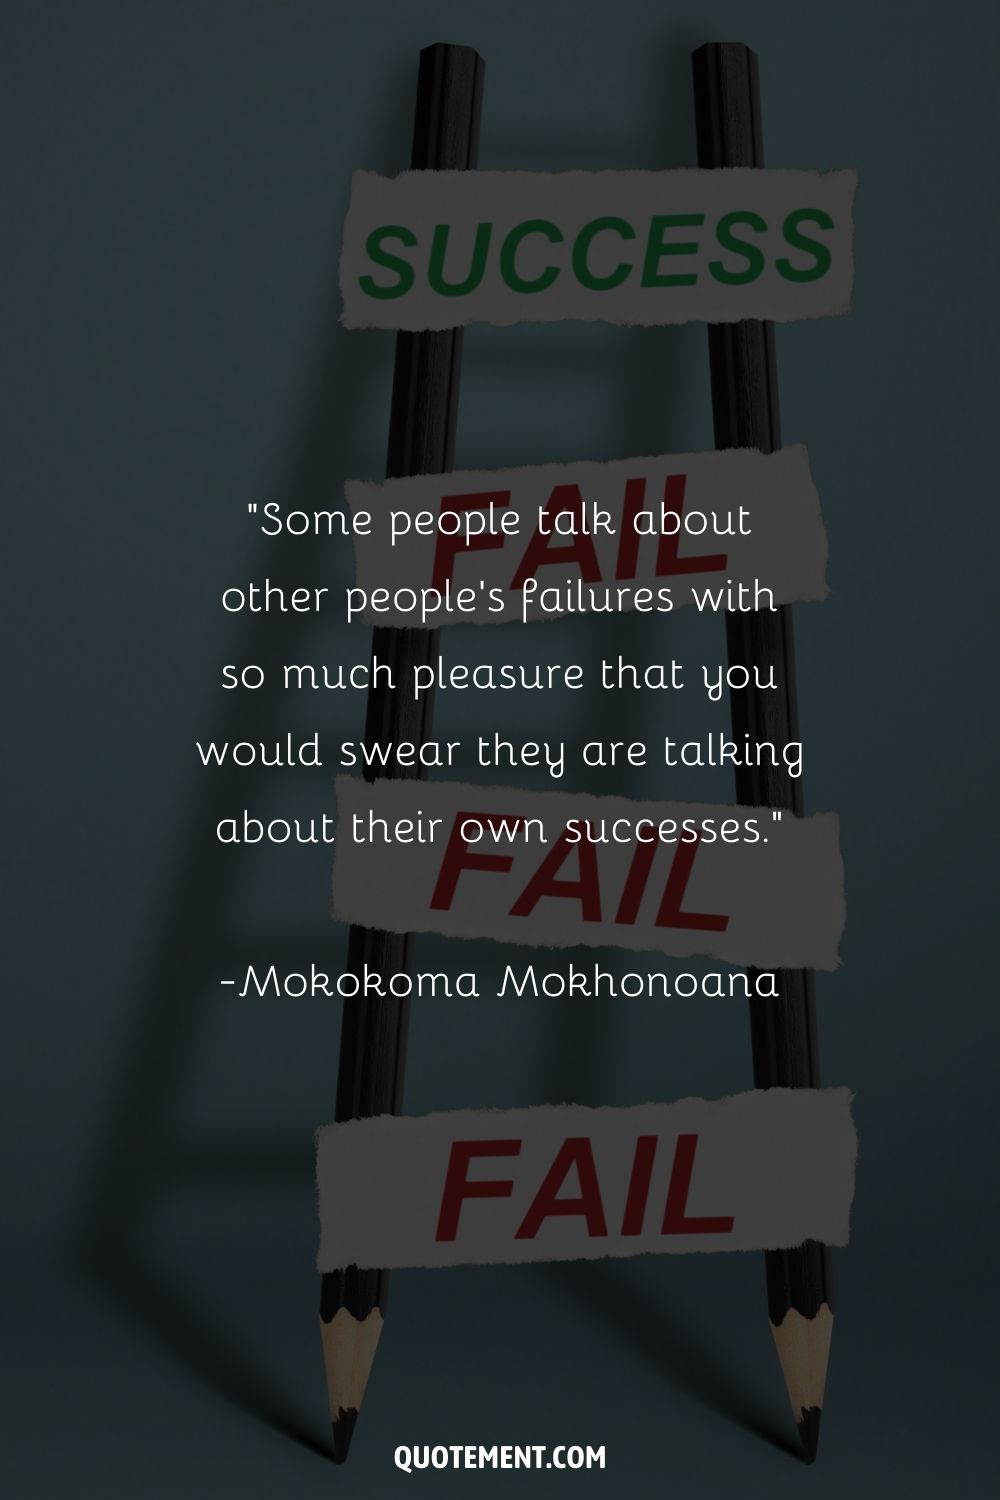 “Some people talk about other people’s failures with so much pleasure that you would swear they are talking about their own successes.” ― Mokokoma Mokhonoana